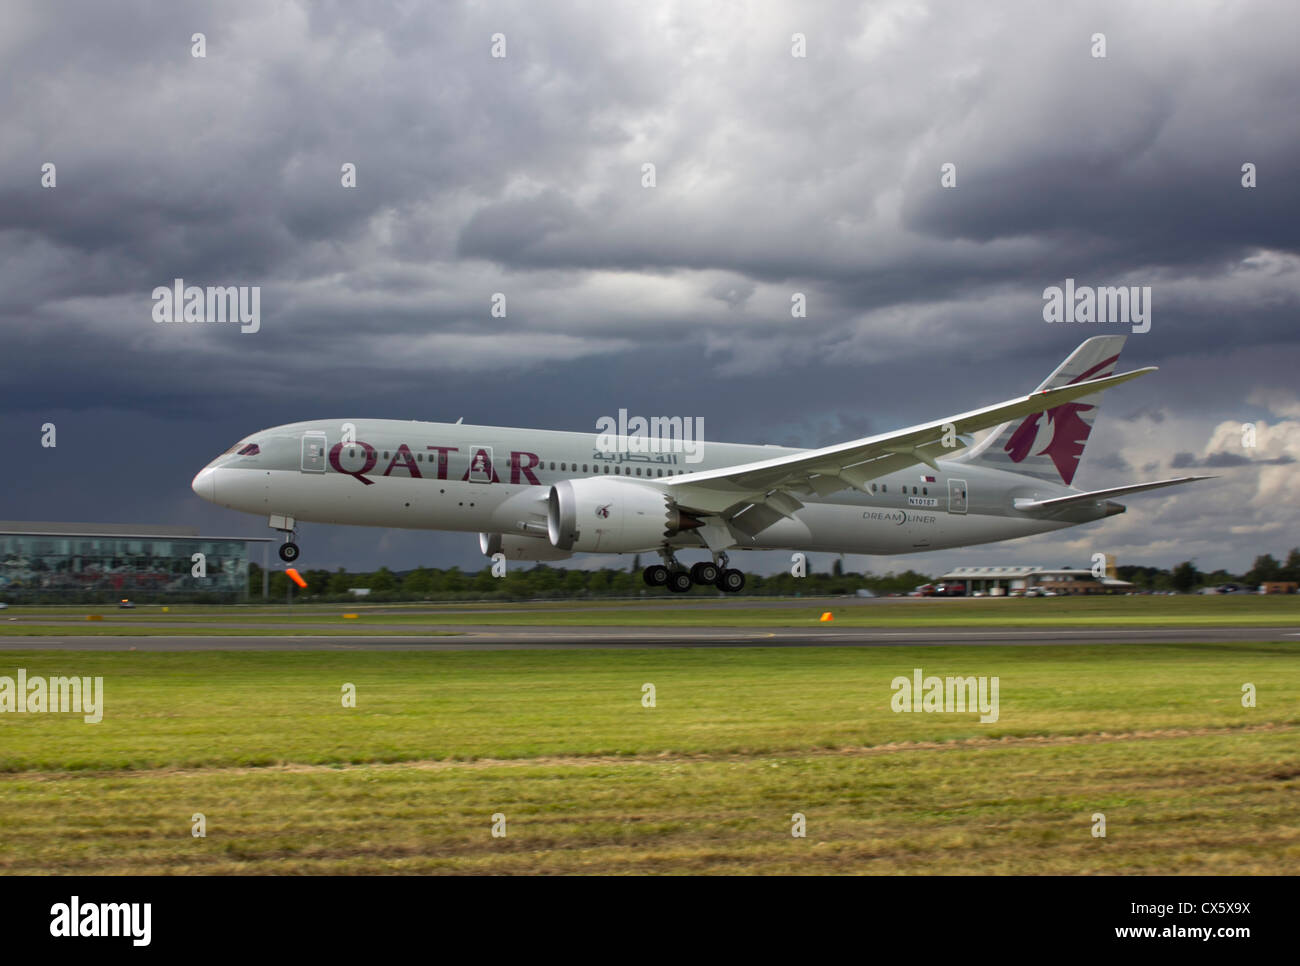 Boeing 787 Dreamliner of Qatar Airways comes in to land at Farnborough International Airshow 2012 after a demonstration flight Stock Photo